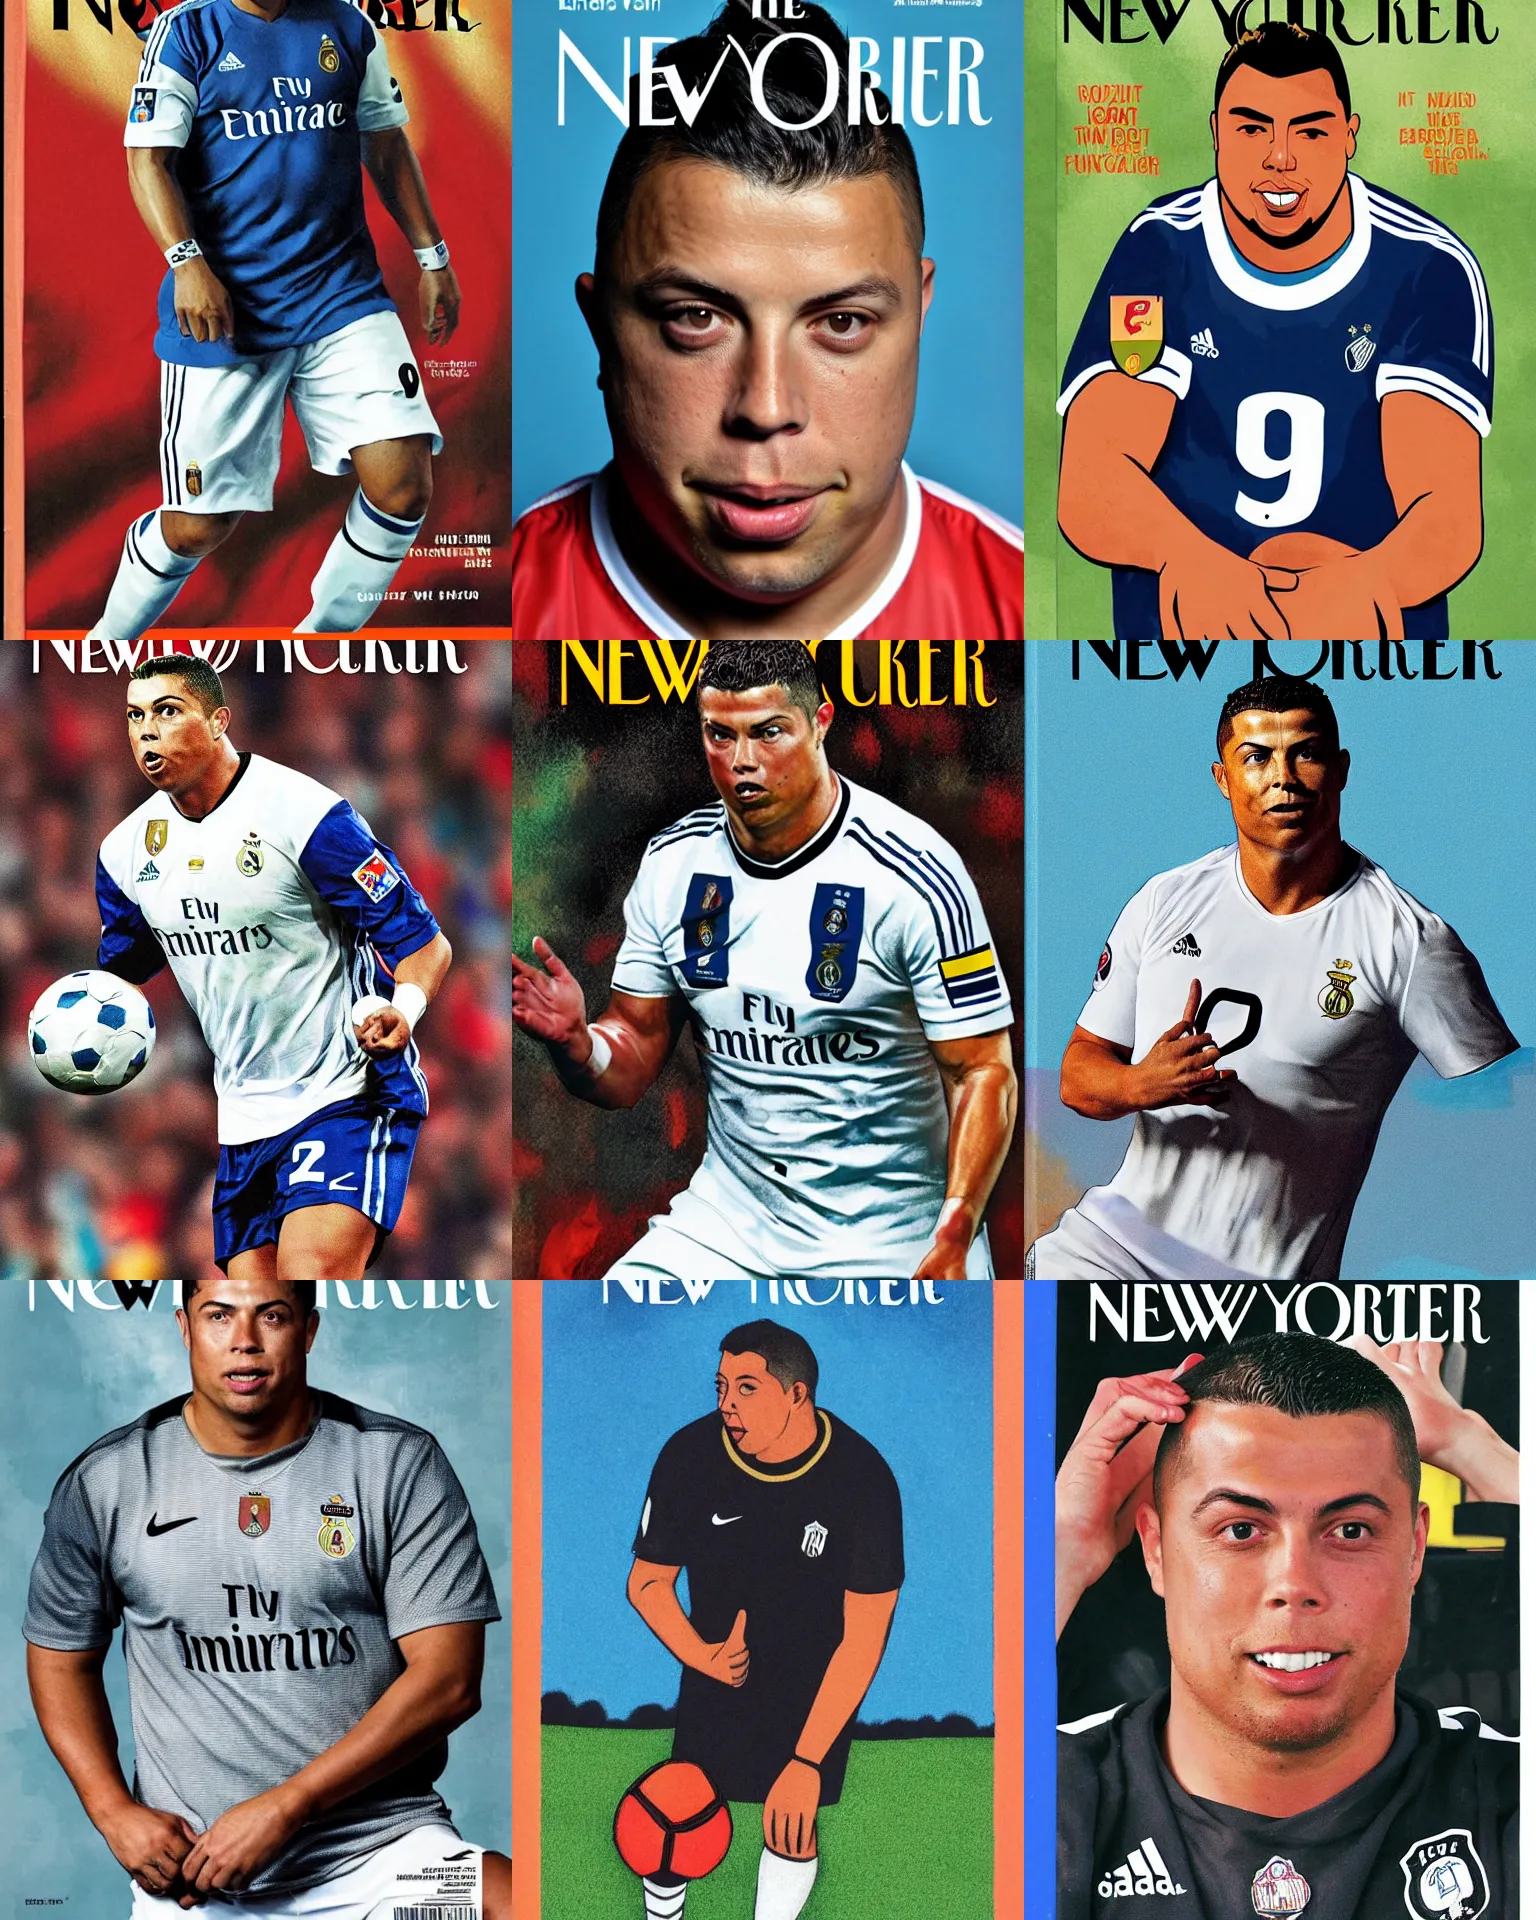 Prompt: ronaldo nazario on the cover of the new yorker magazine